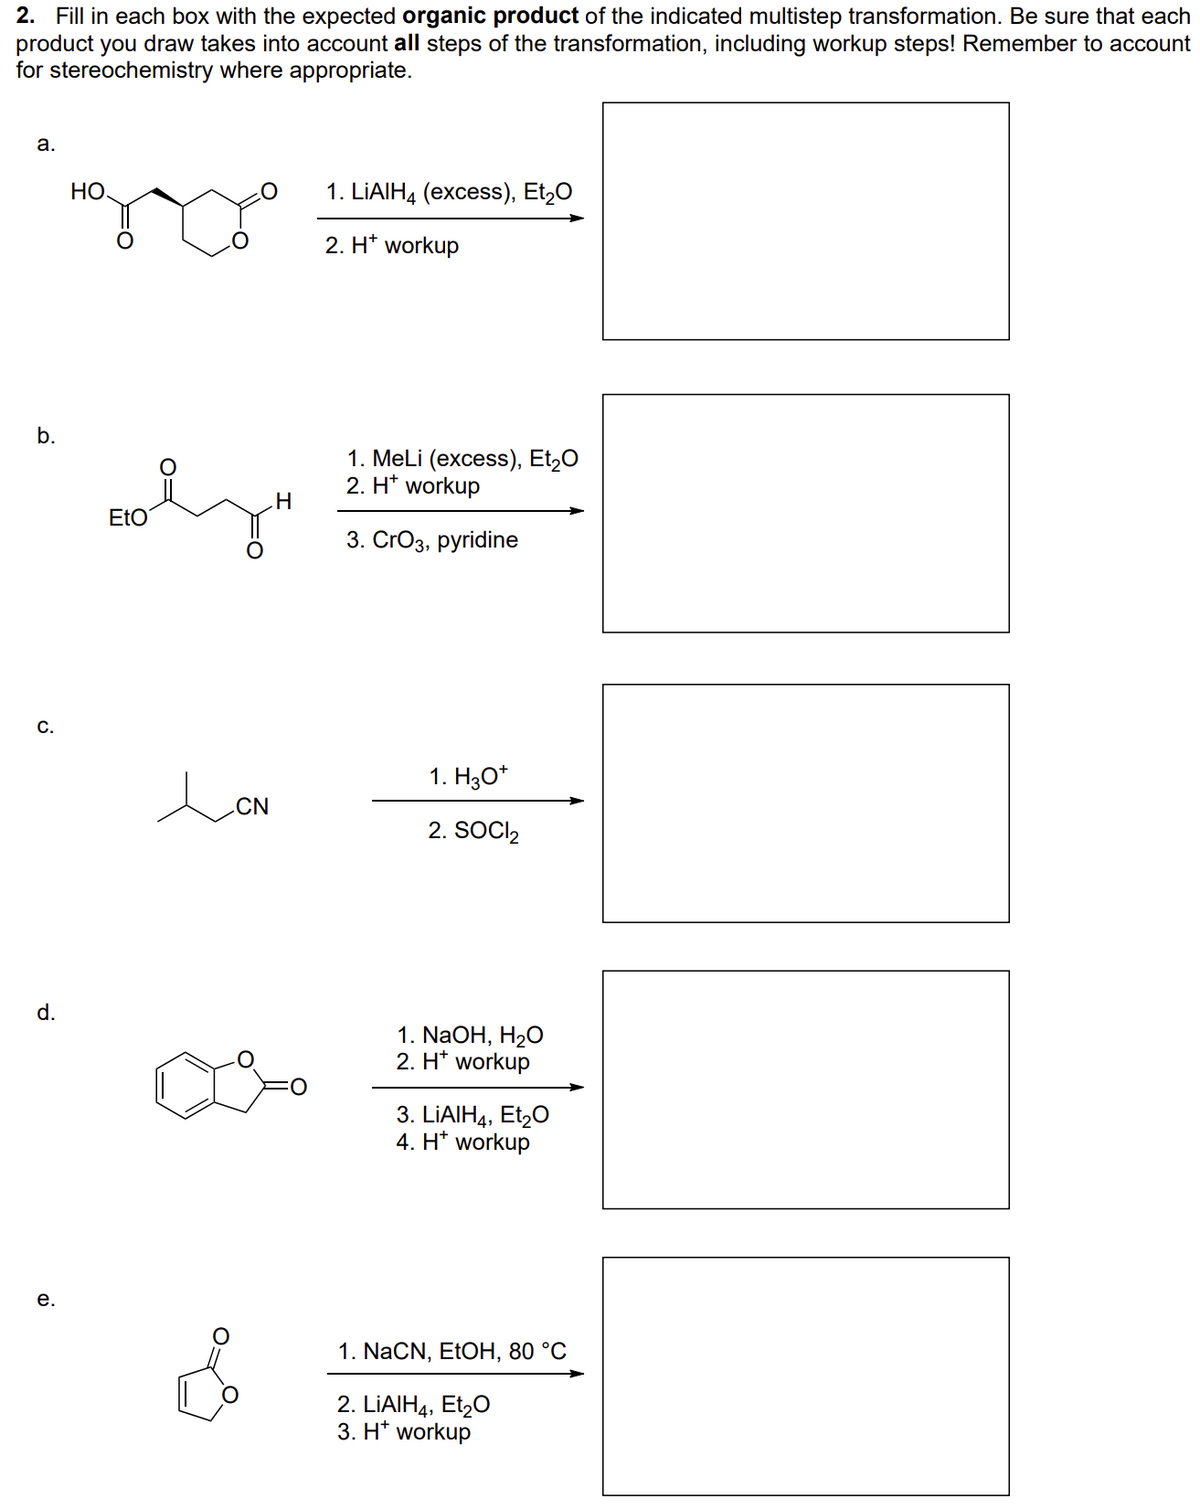 2. Fill in each box with the expected organic product of the indicated multistep transformation. Be sure that each
product you draw takes into account all steps of the transformation, including workup steps! Remember to account
for stereochemistry where appropriate.
а.
HO.
1. LIAIH4 (excess), Et,0
2. H* workup
b.
1. MeLi (excess), Et,0
2. H* workup
H.
EtO
3. CrОз, рyridine
C.
1. Hзо"
.CN
2. SOCI,
d.
1. NaOH, H20
2. H* workup
3. LIAIH4, Et,0
4. H* workup
е.
1. NaCN, ELOH, 80 °C
2. LİAIH4, Et,0
3. H* workup
